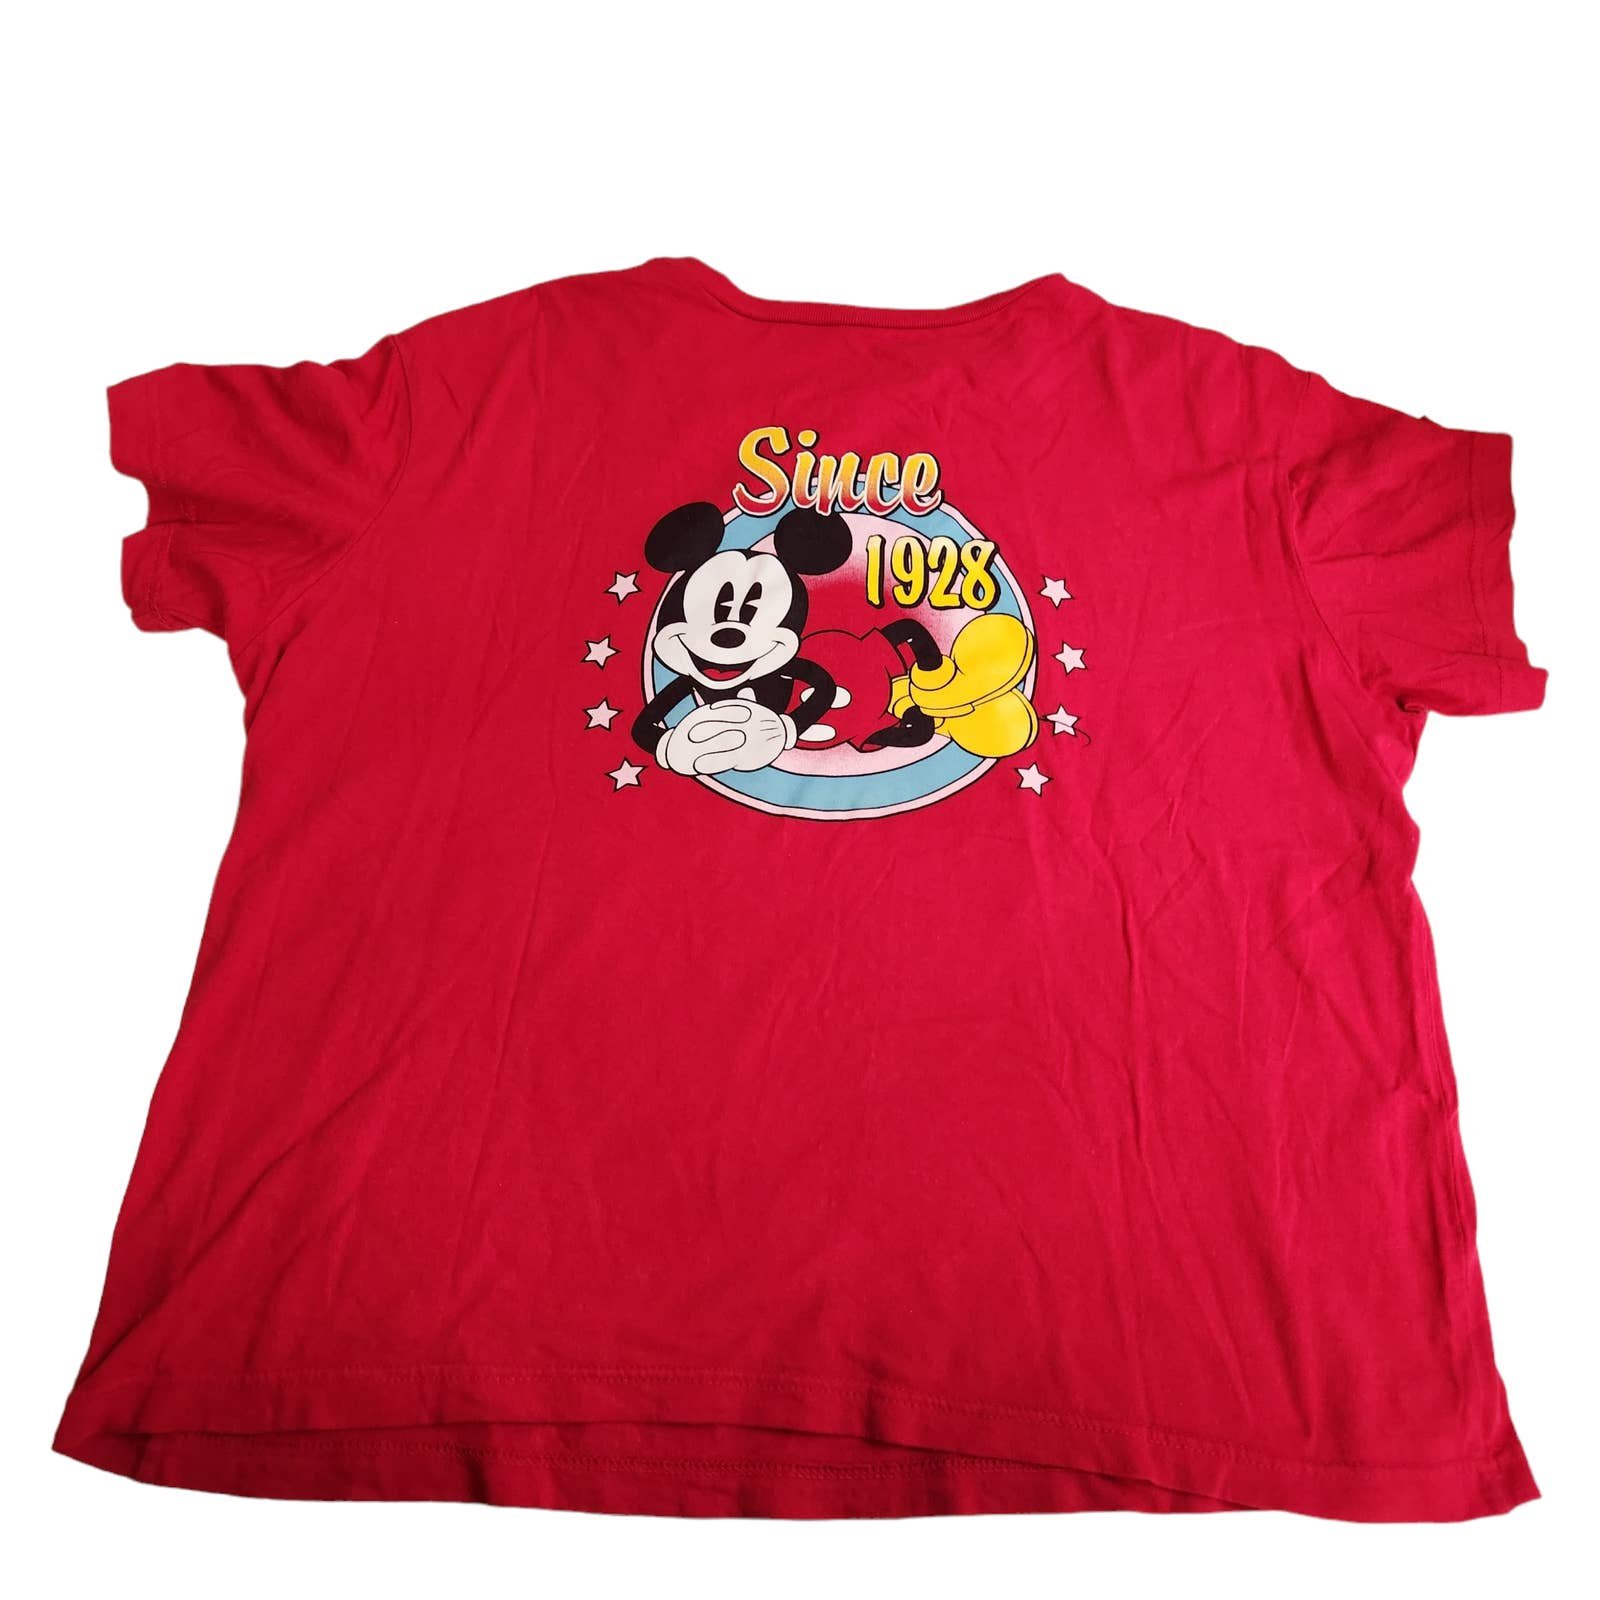 High quality Disney 2X Mickey Mouse Short Sleeve Red T Shirt L26KbWI8n Outlet Store